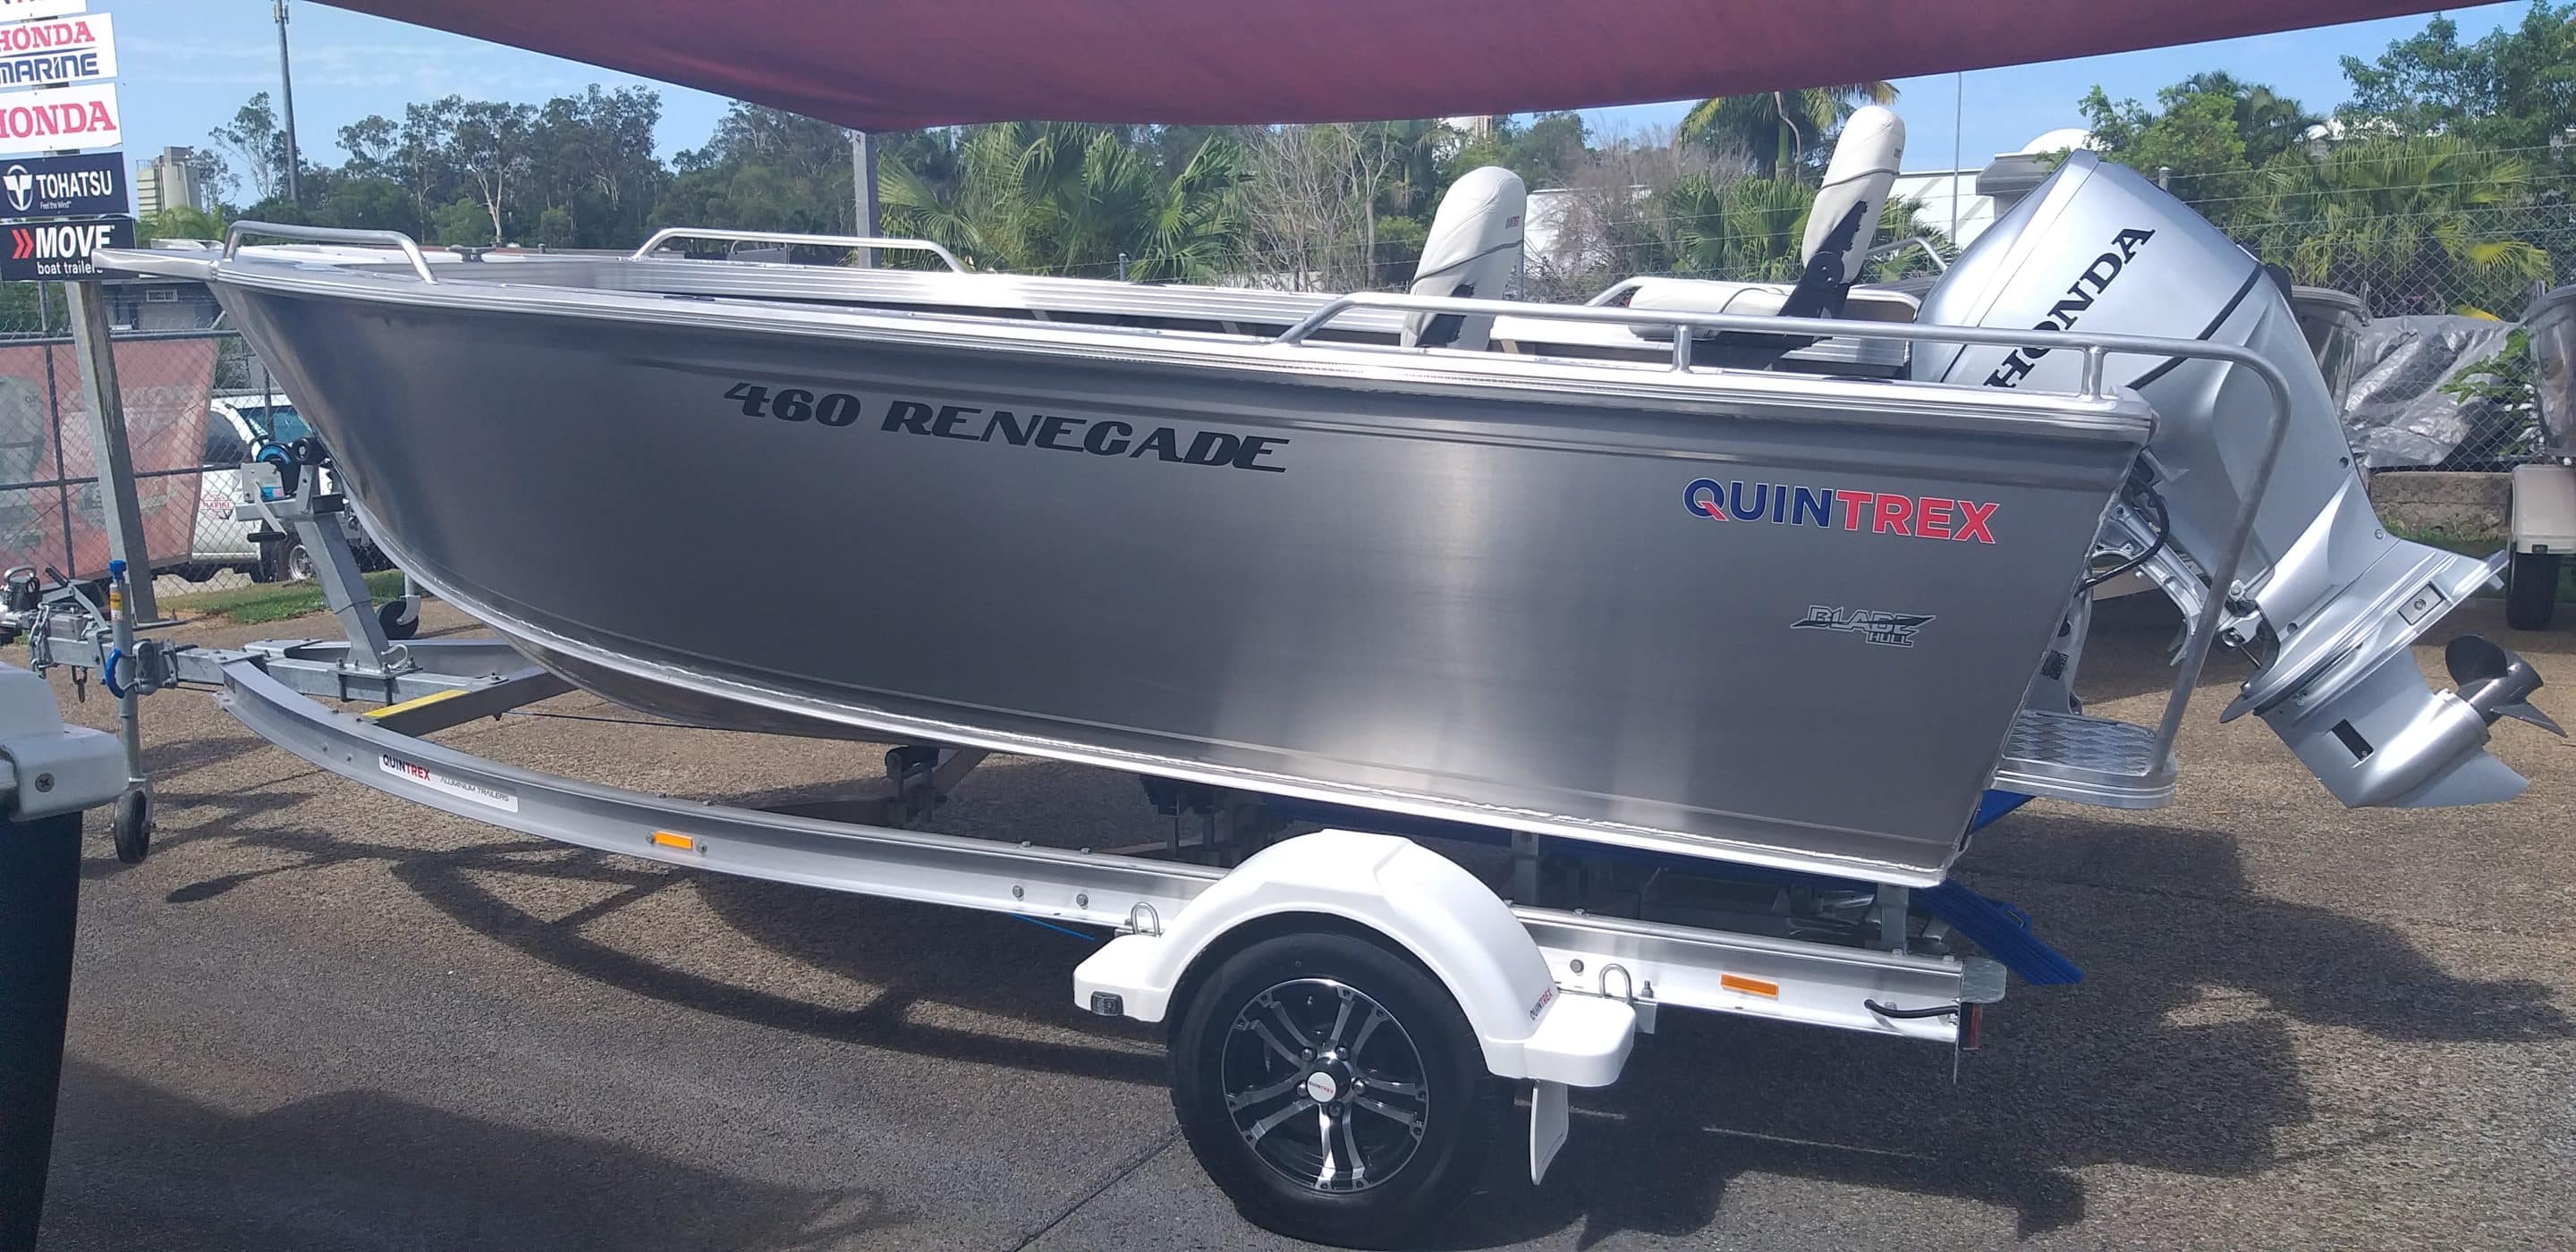 Quintrex 460 Renegade TS Package​